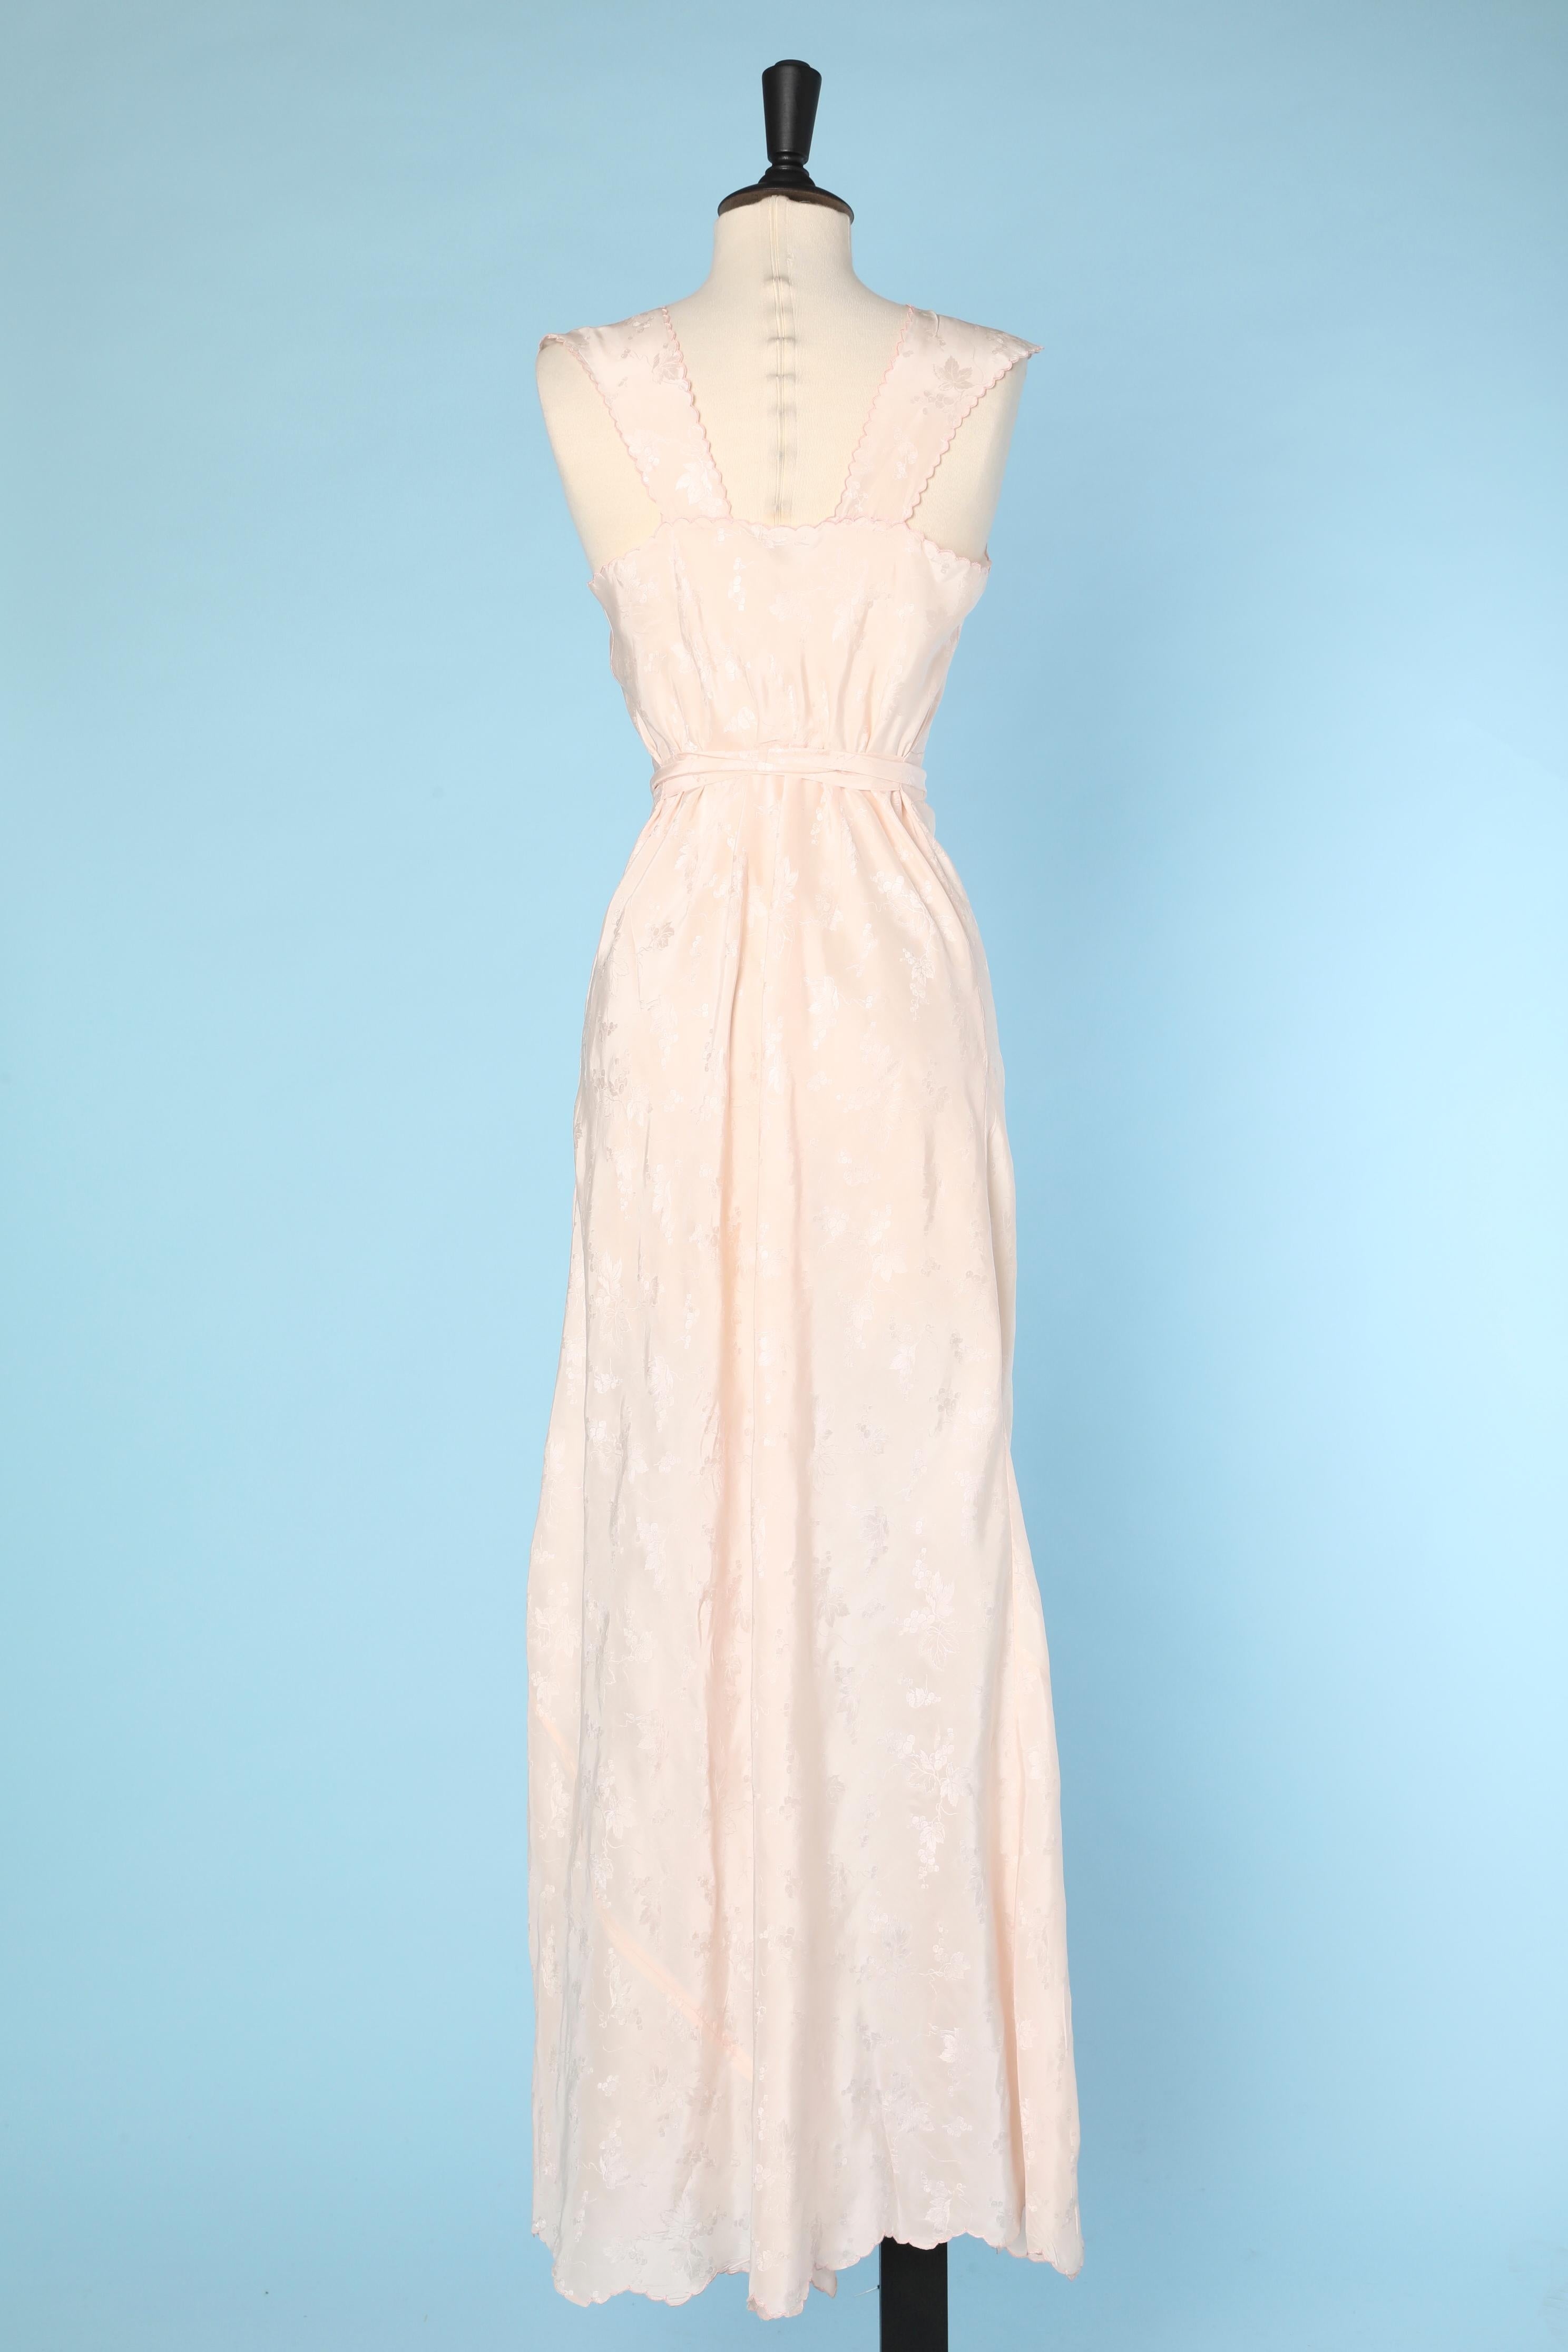 Beige 1930's pale silk jacquard nightgown with grape bunches jacquard pattern 